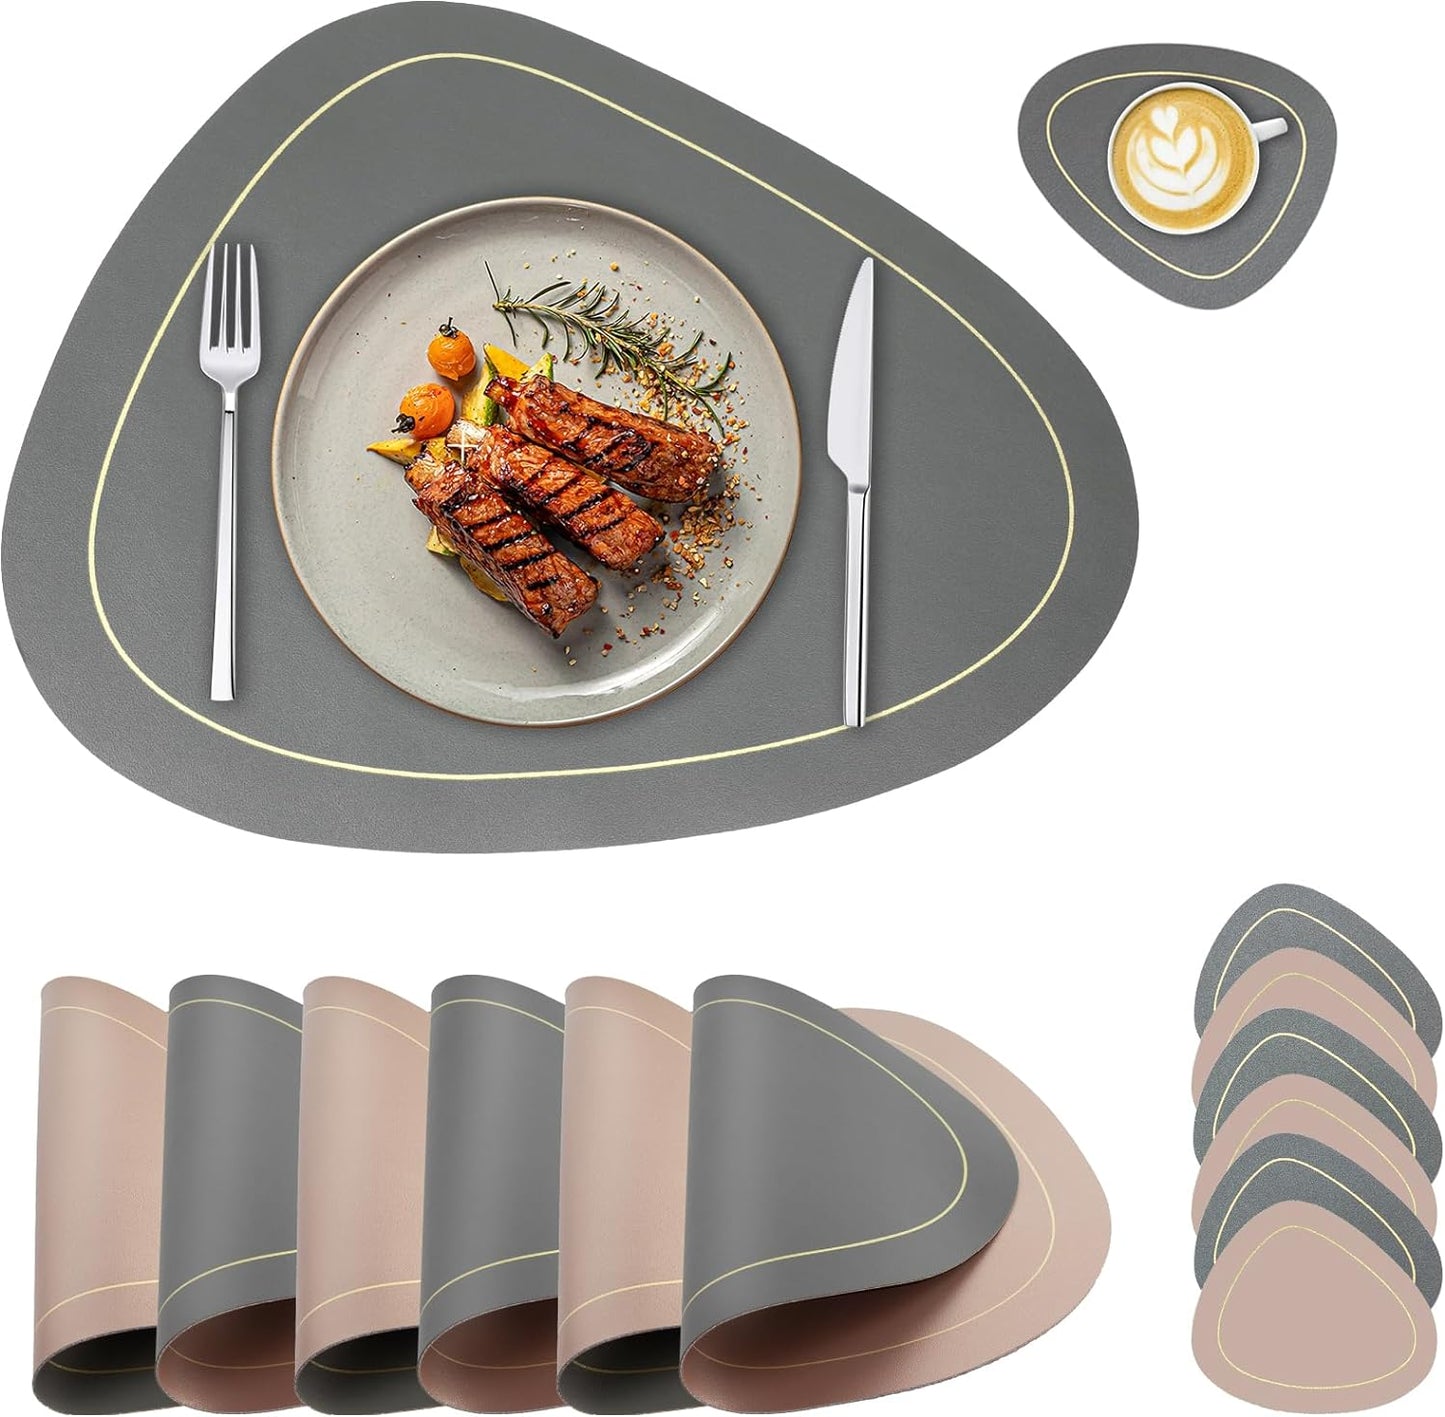 Leather Placemats Set of 6 Double-Sided Washable Heat Resistant Placemats with Coasters Waterproof Oil-Proof Wipeable Place Mats for Kitchen Table Dining Patio Indoor Outdoor Table Mats-Grey